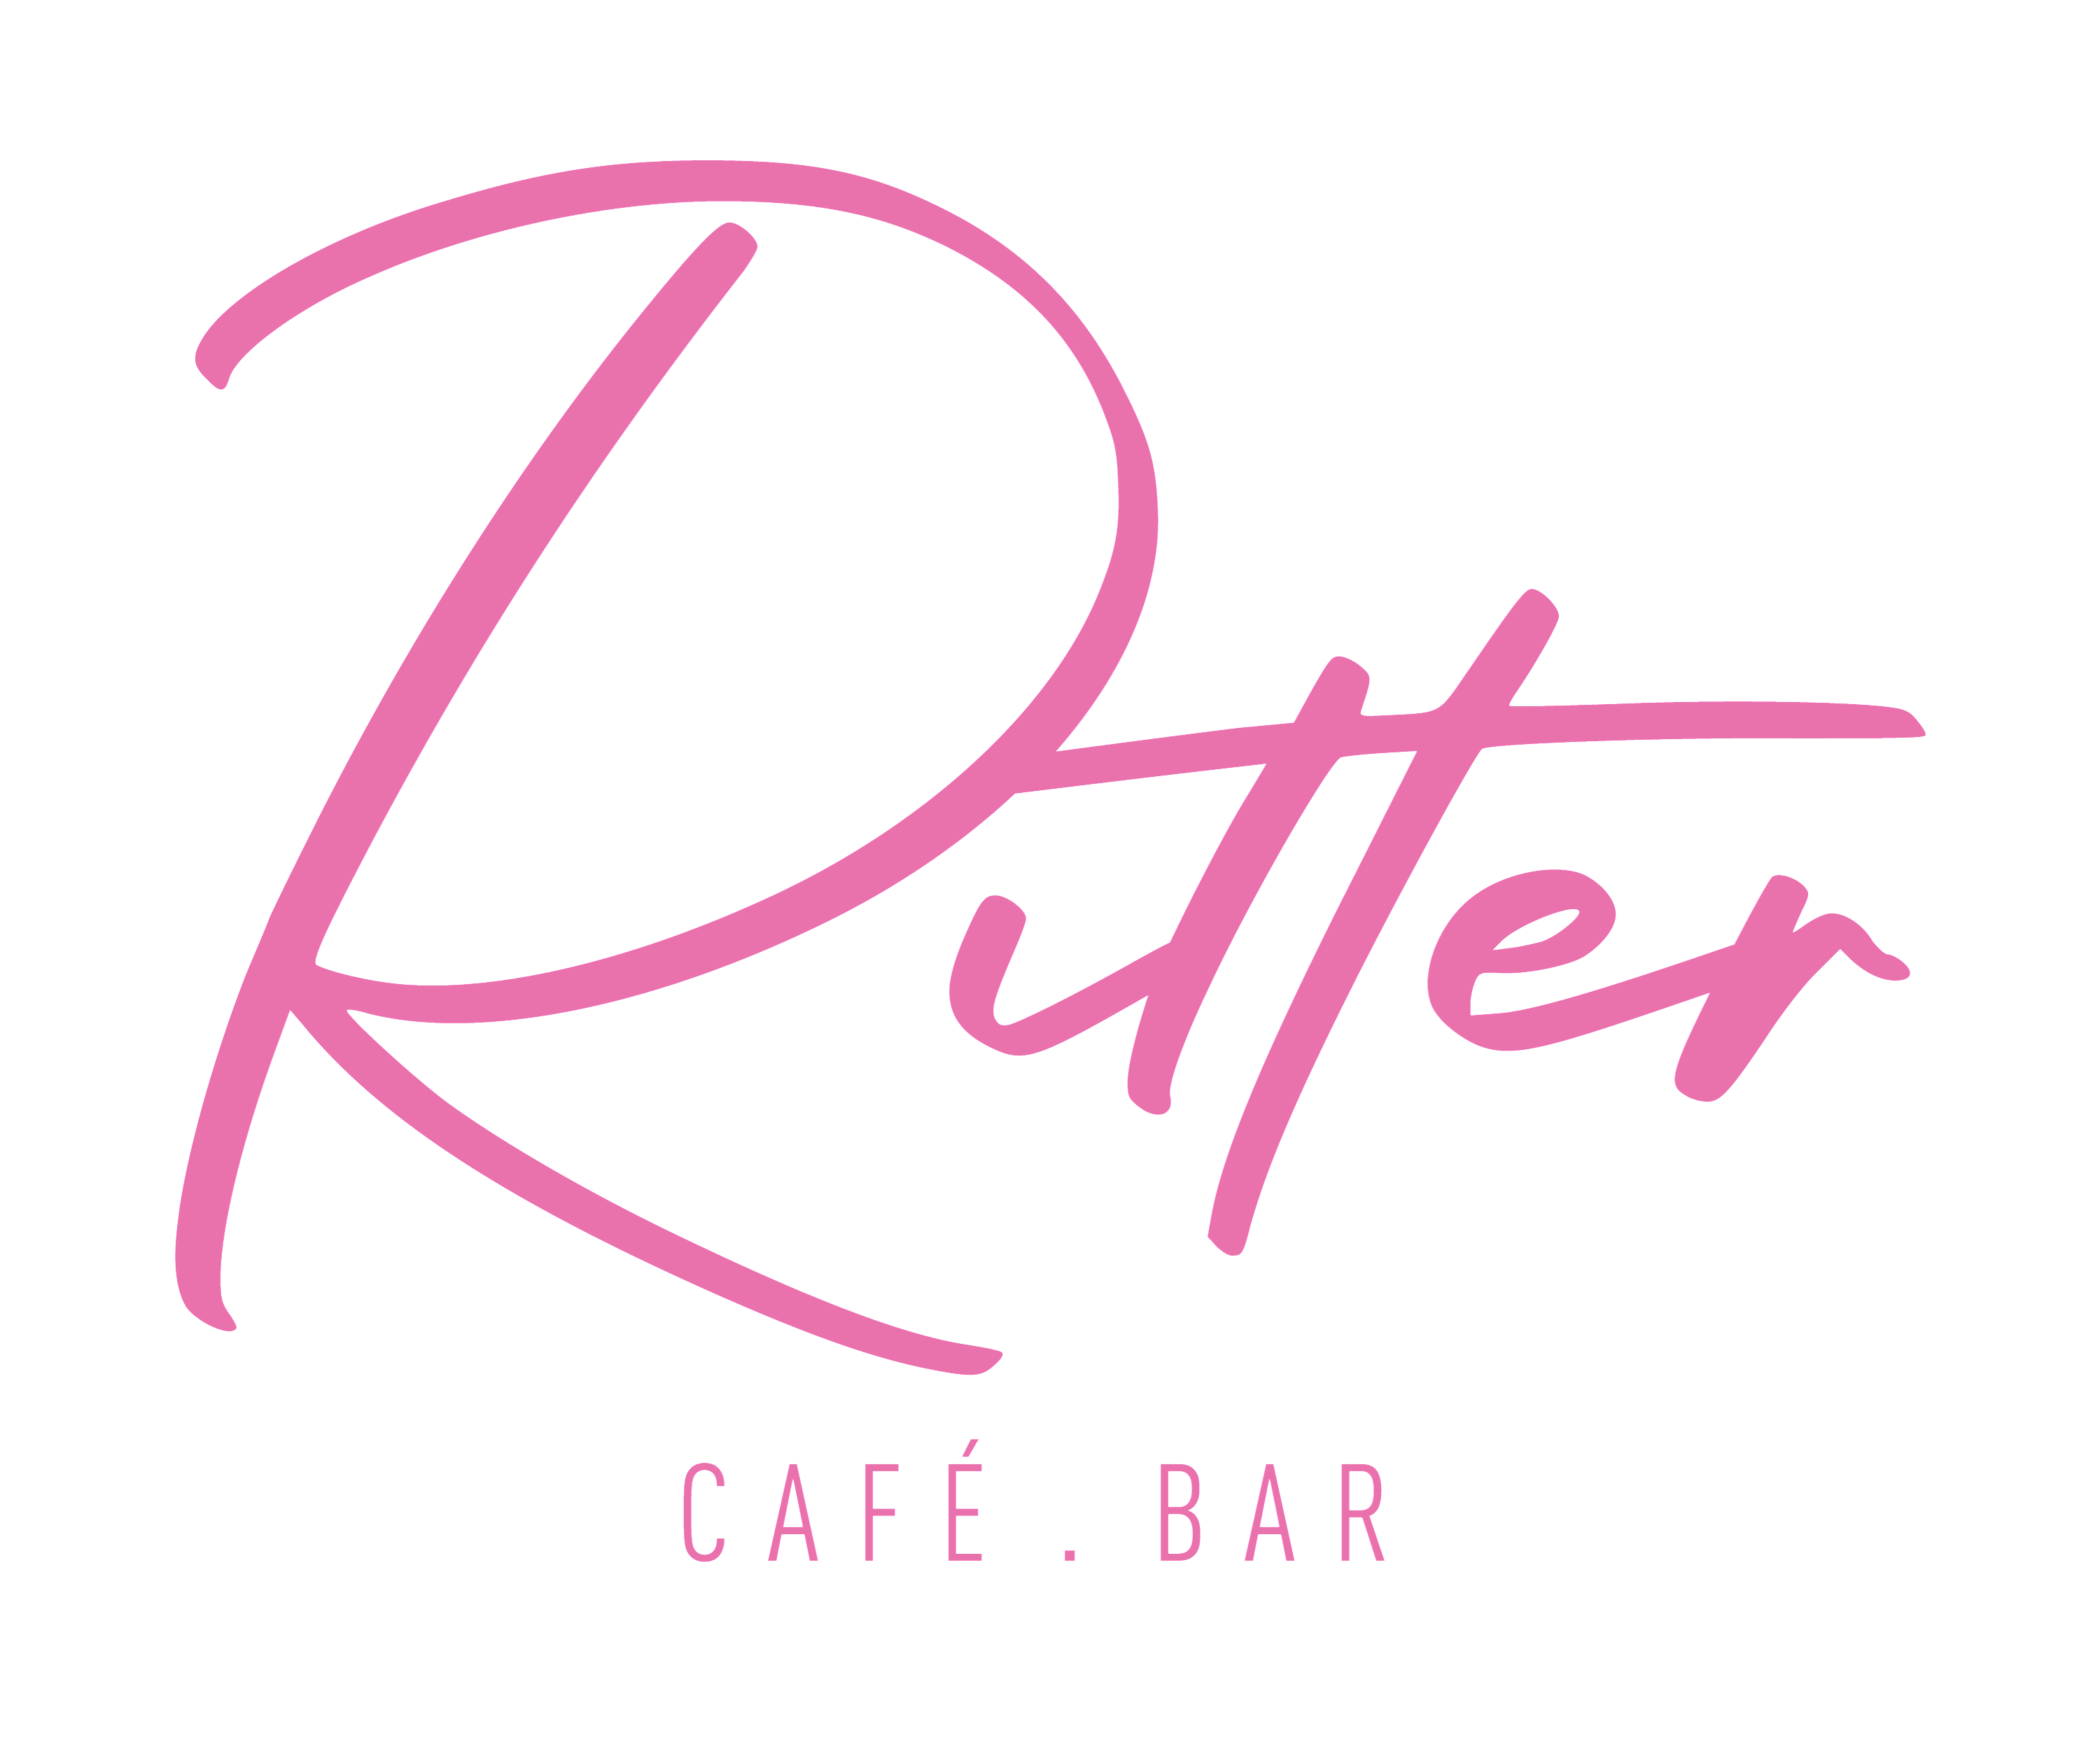 cafe ritter